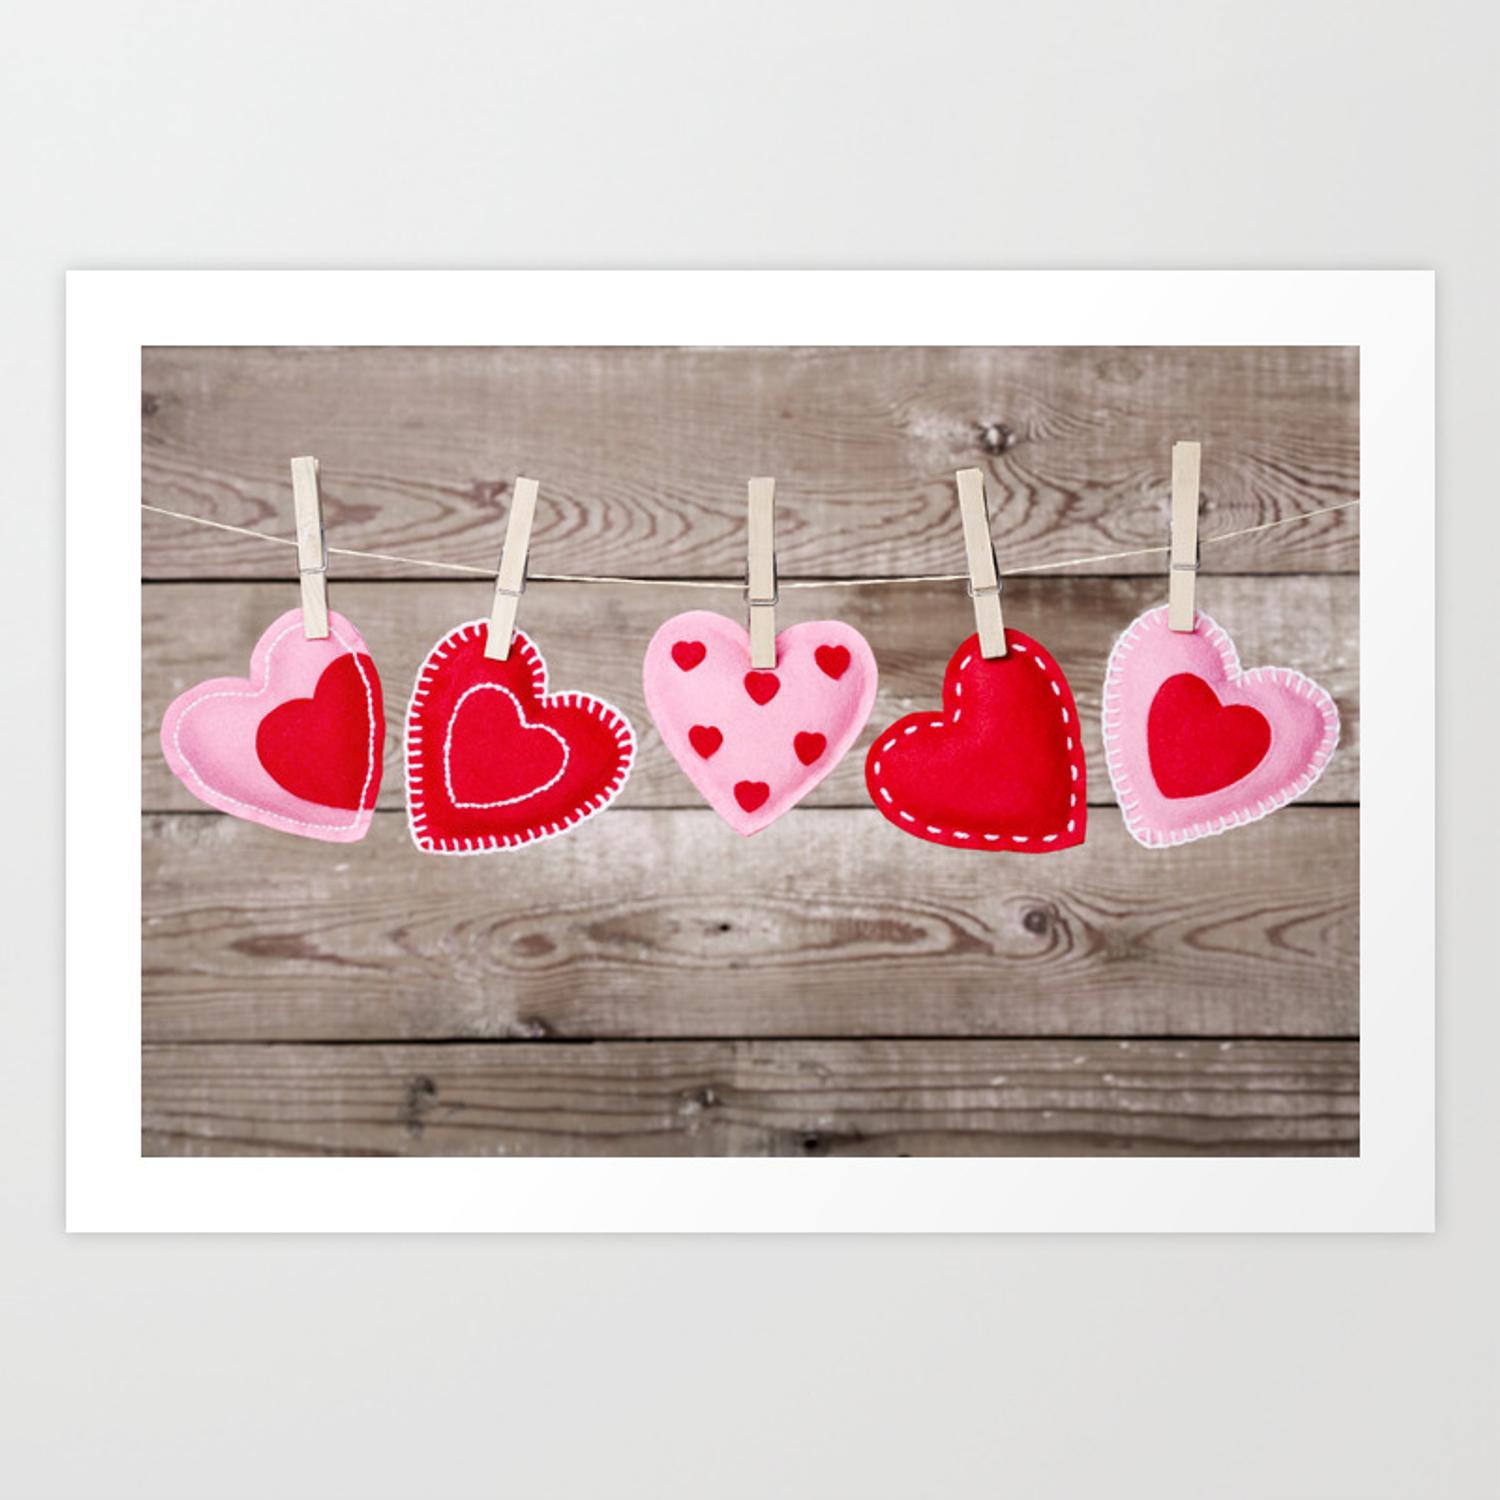 II with Valentine's Day hearts decorations on a